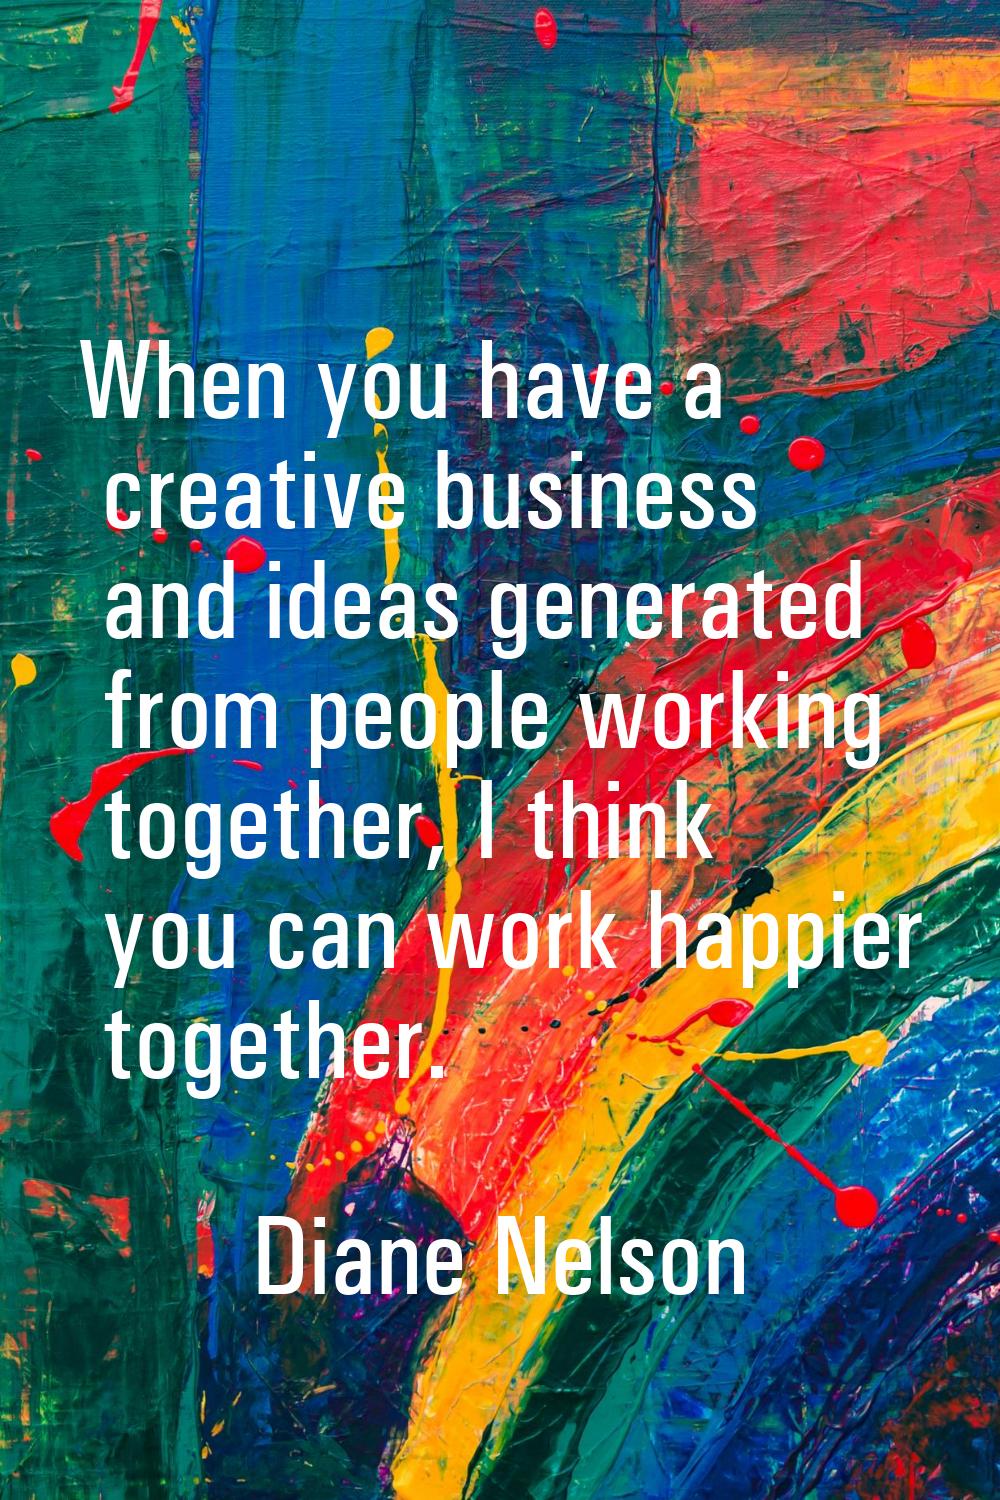 When you have a creative business and ideas generated from people working together, I think you can